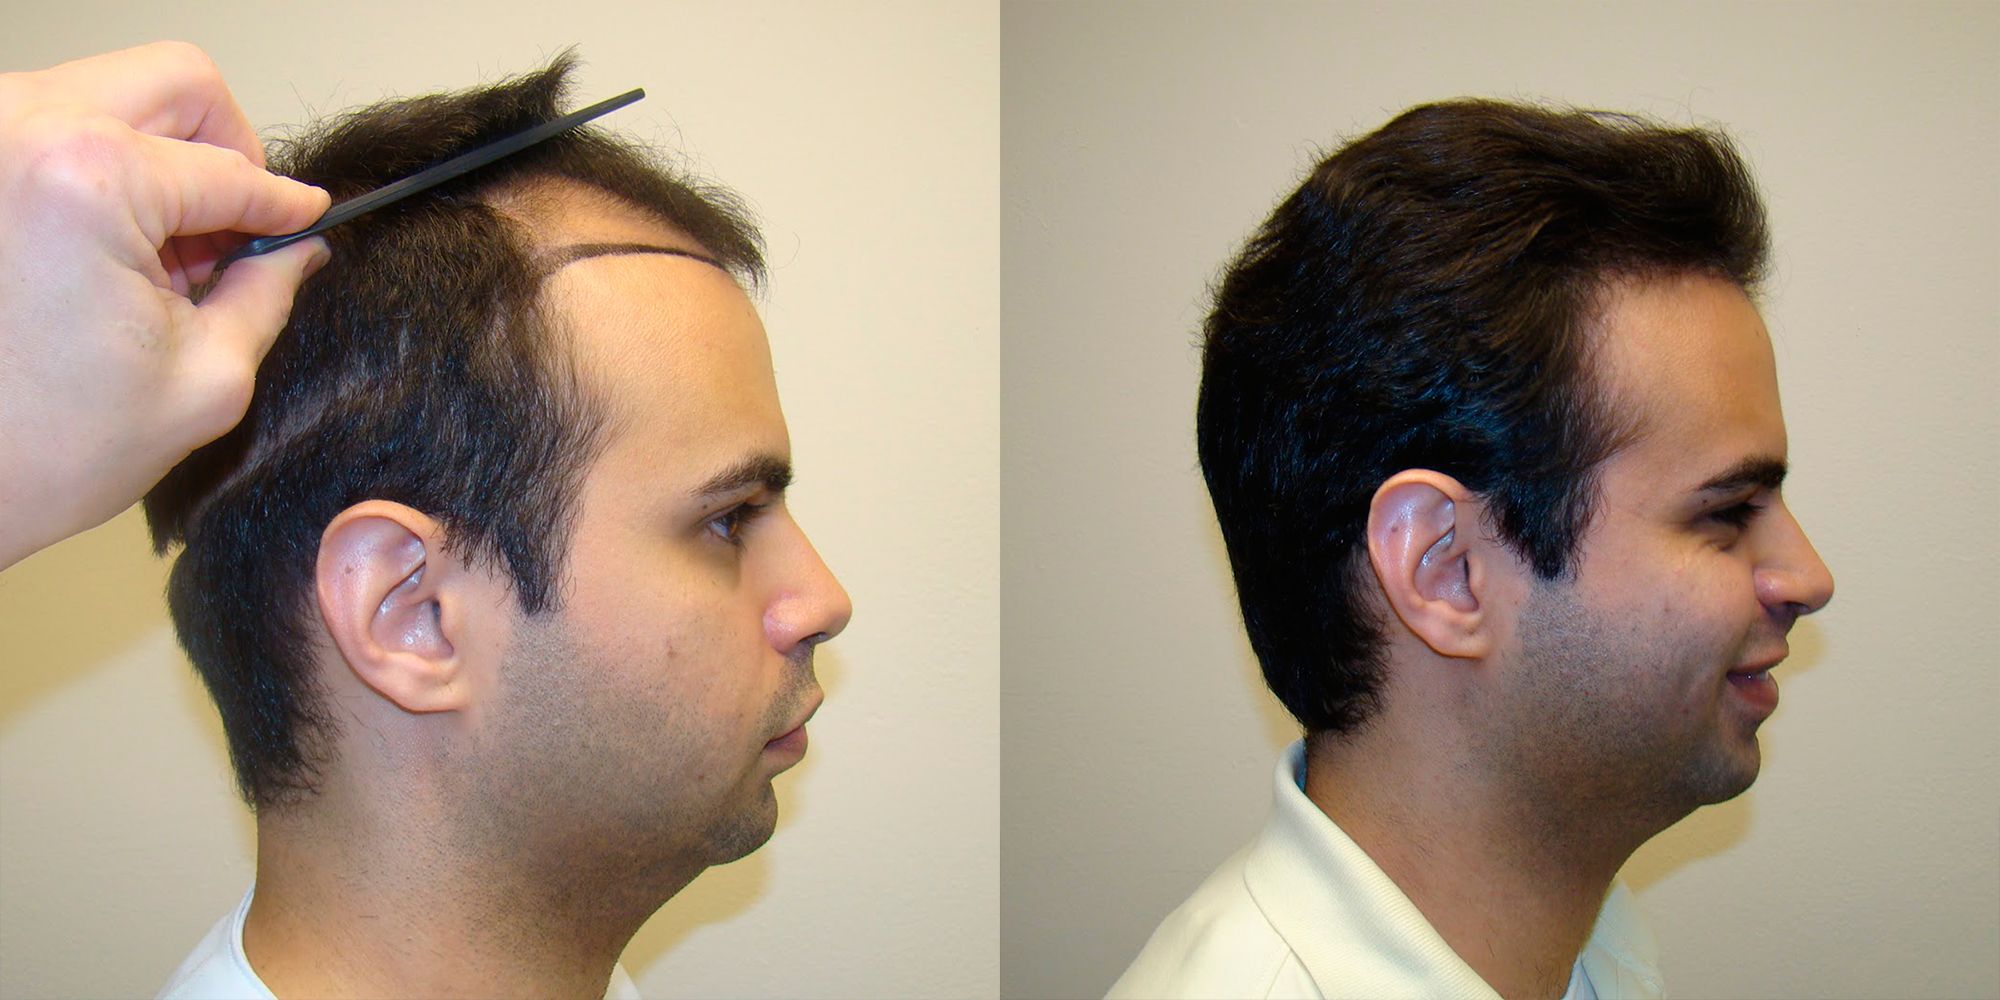 is hair transplant covered by insurance